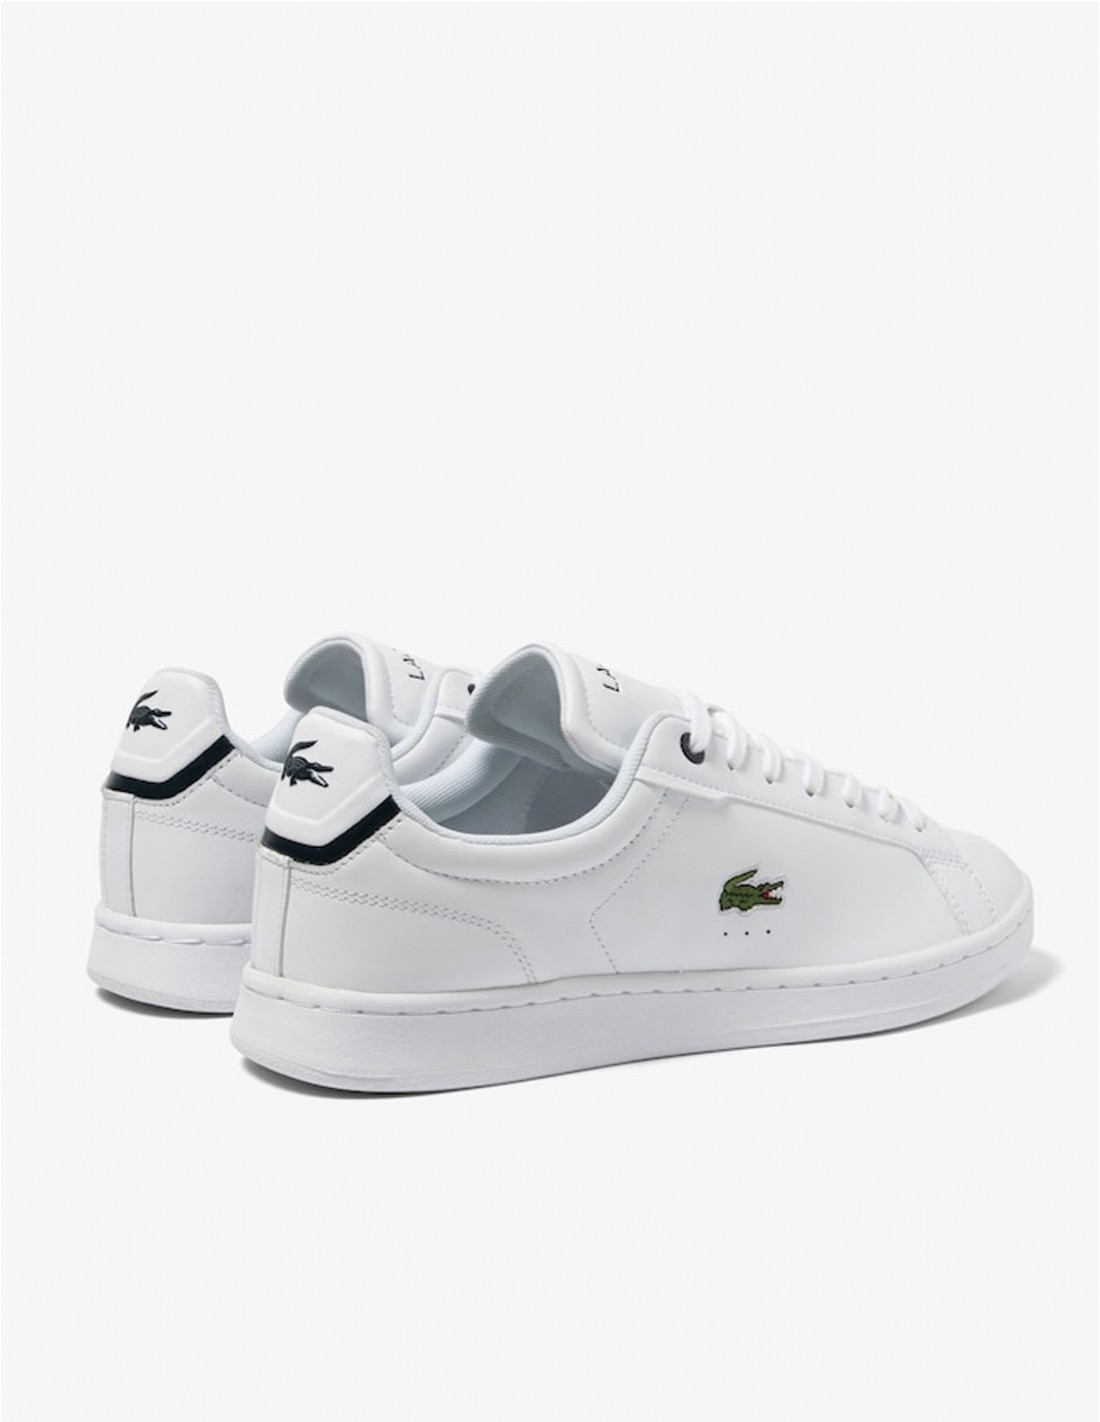 LACOSTE Tenis Carnaby BL Hombre - LIMONERA